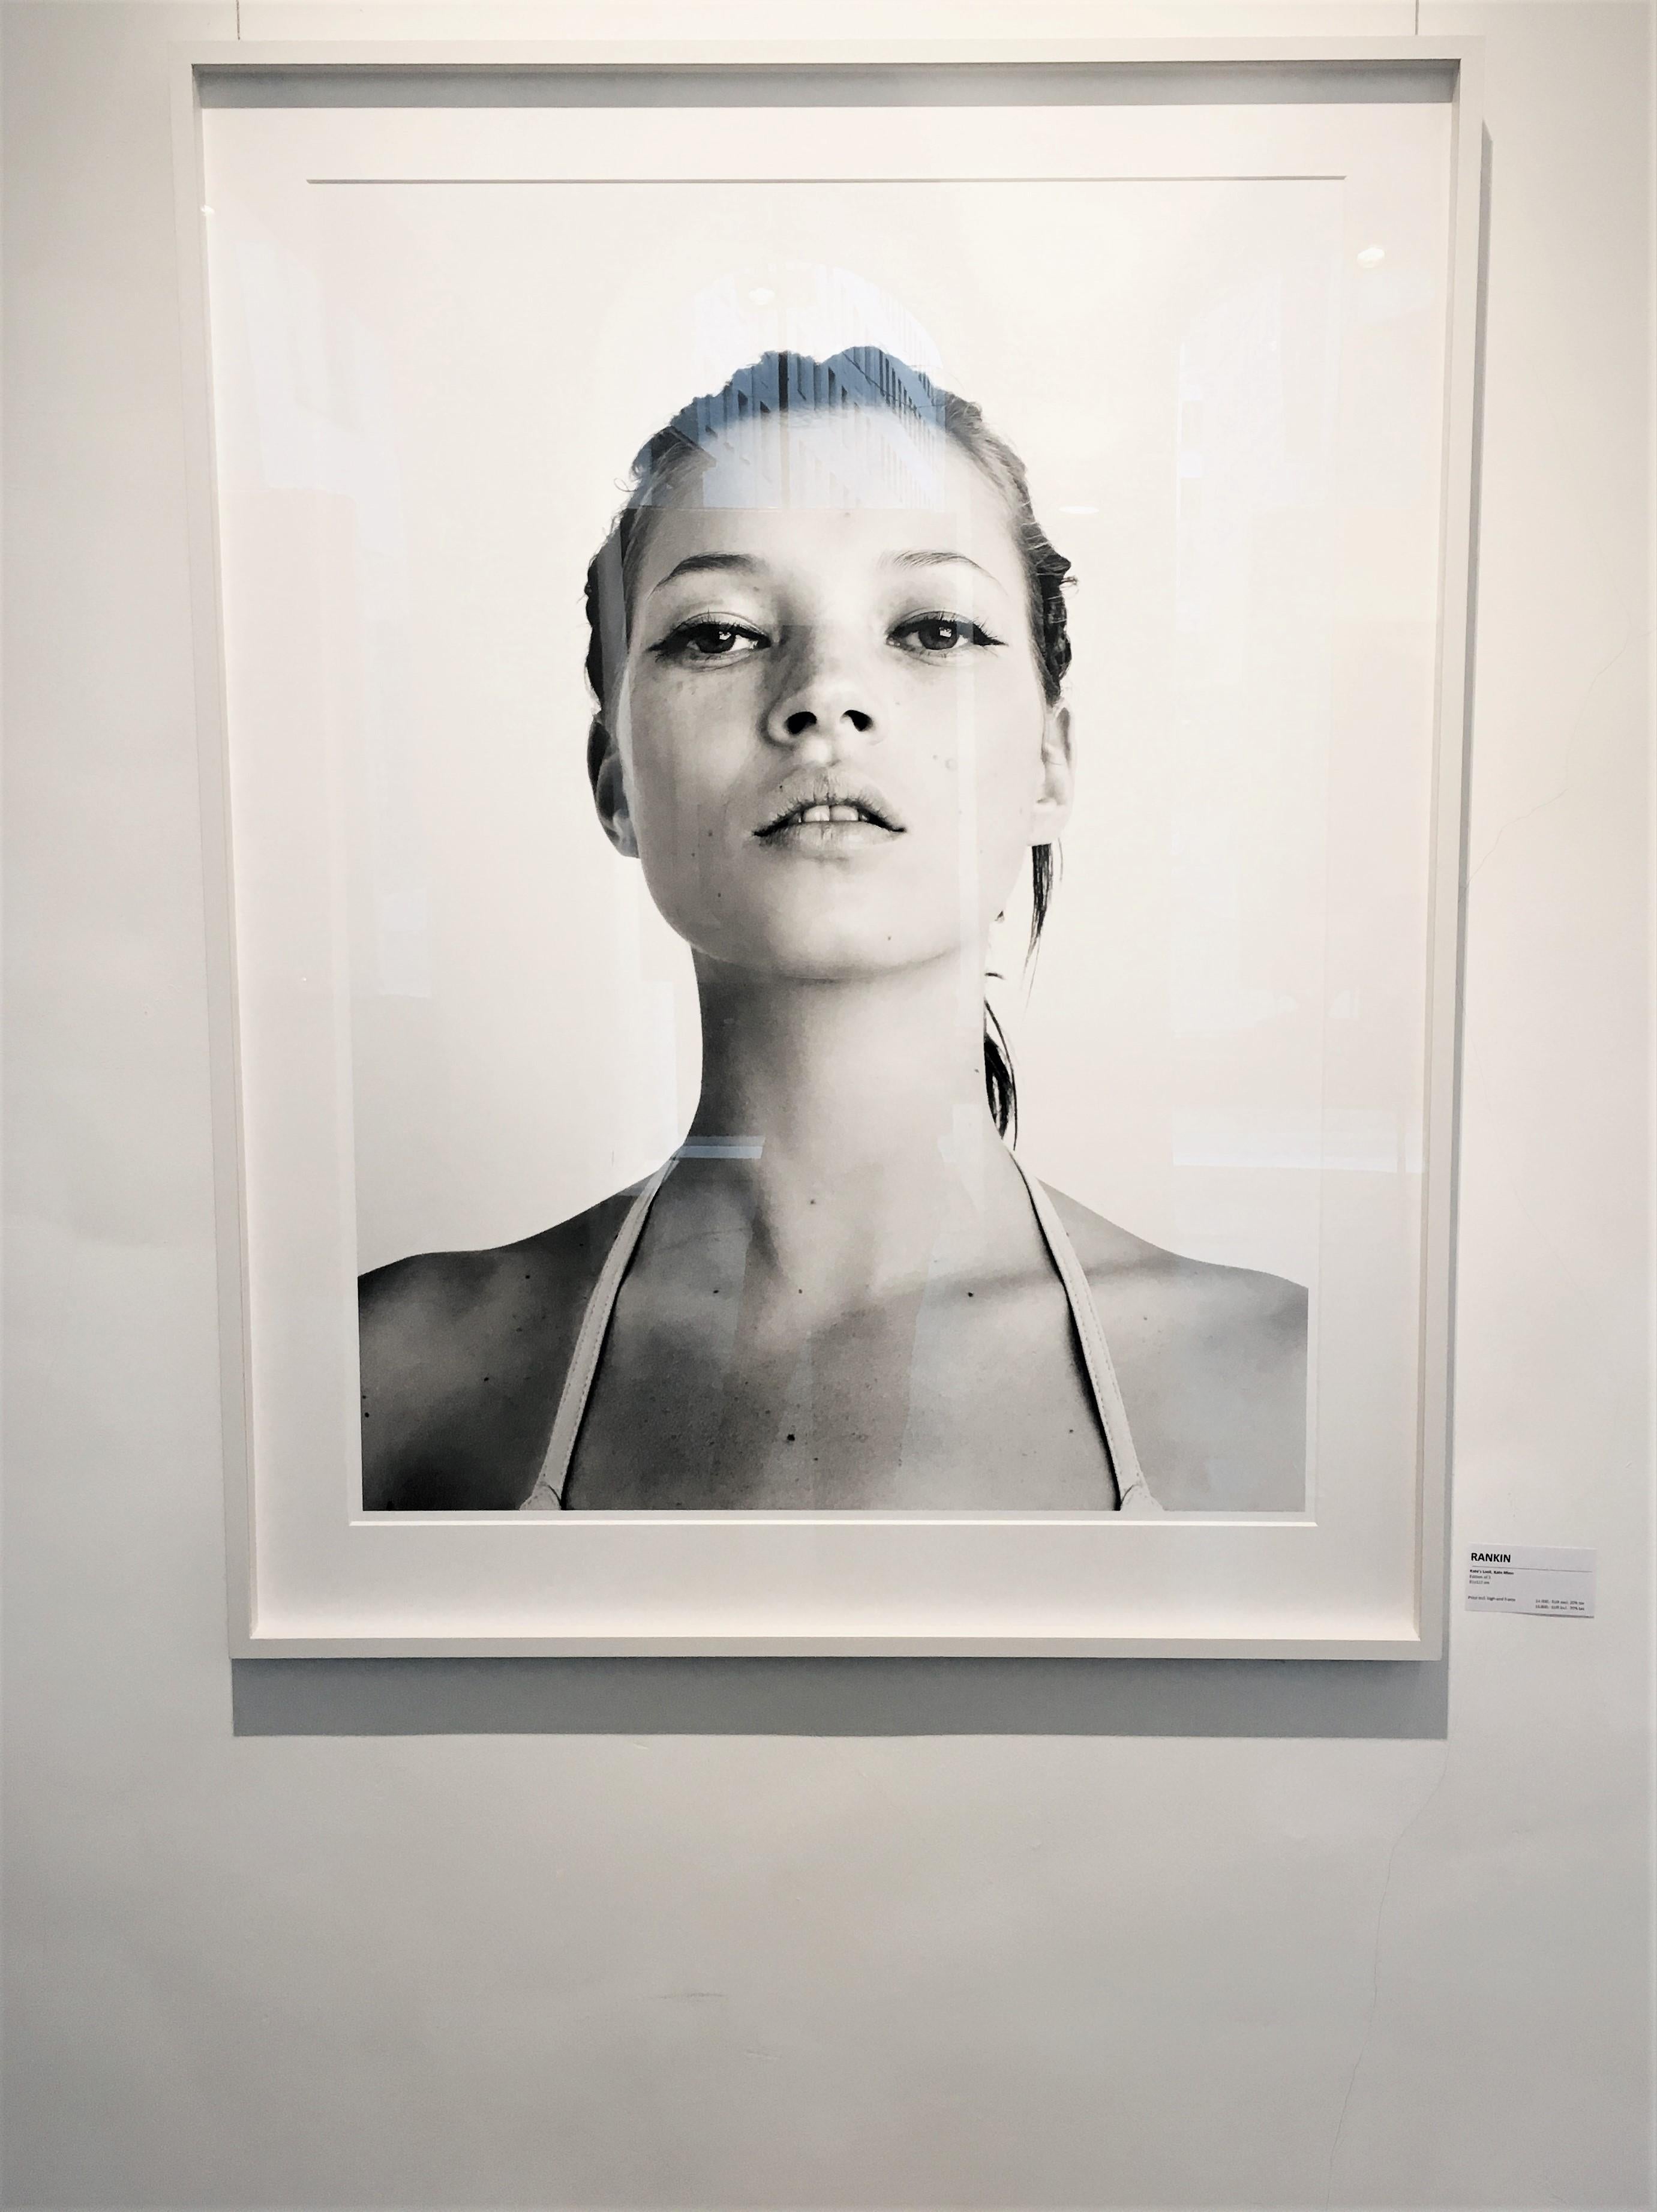 Kate's Look - portrait of the supermodel Kate Moss, fine art photography, 1998 - Photograph by Rankin